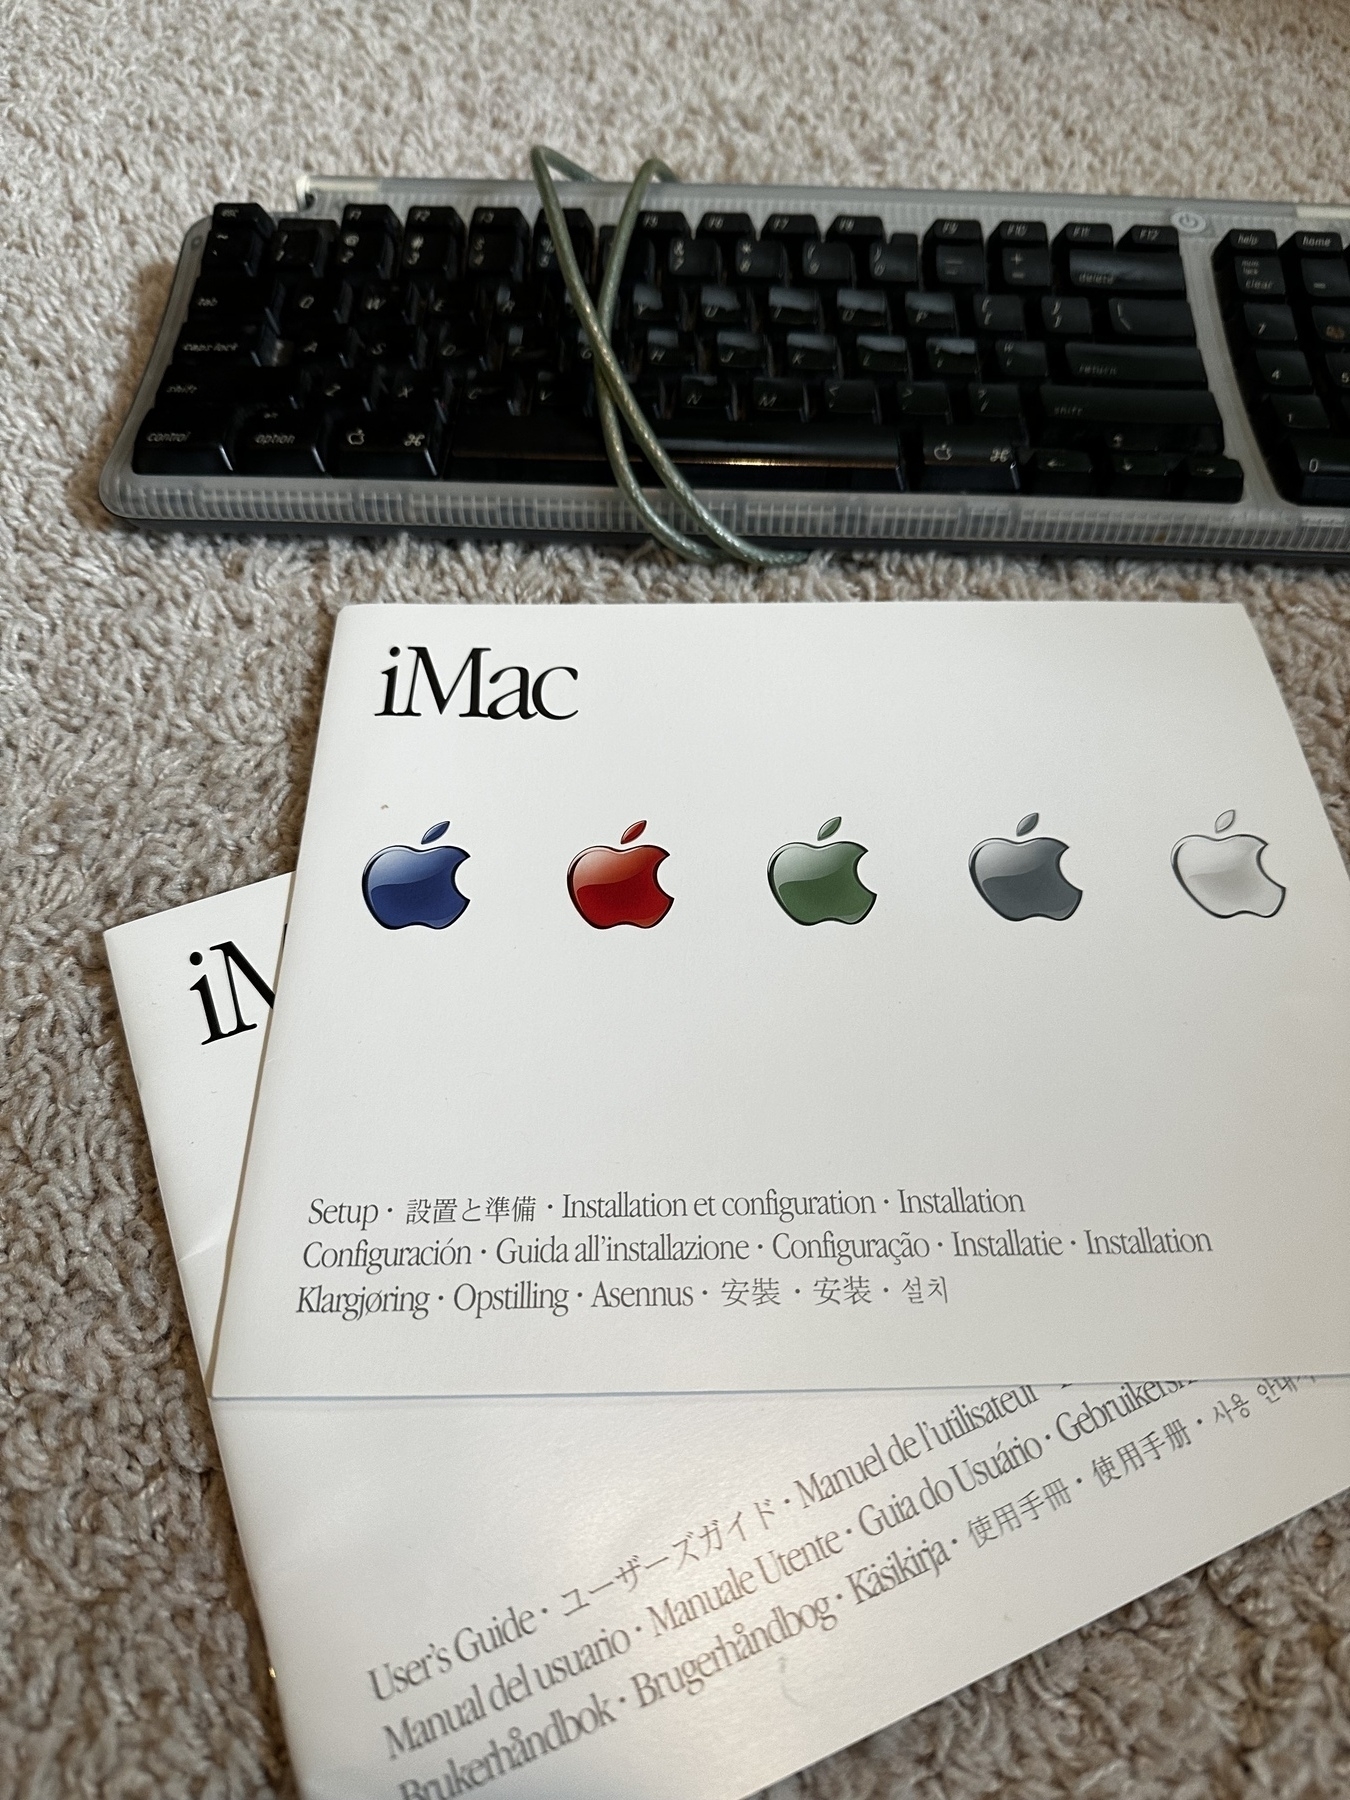 iMac manuals and keyboard from the year 2000.